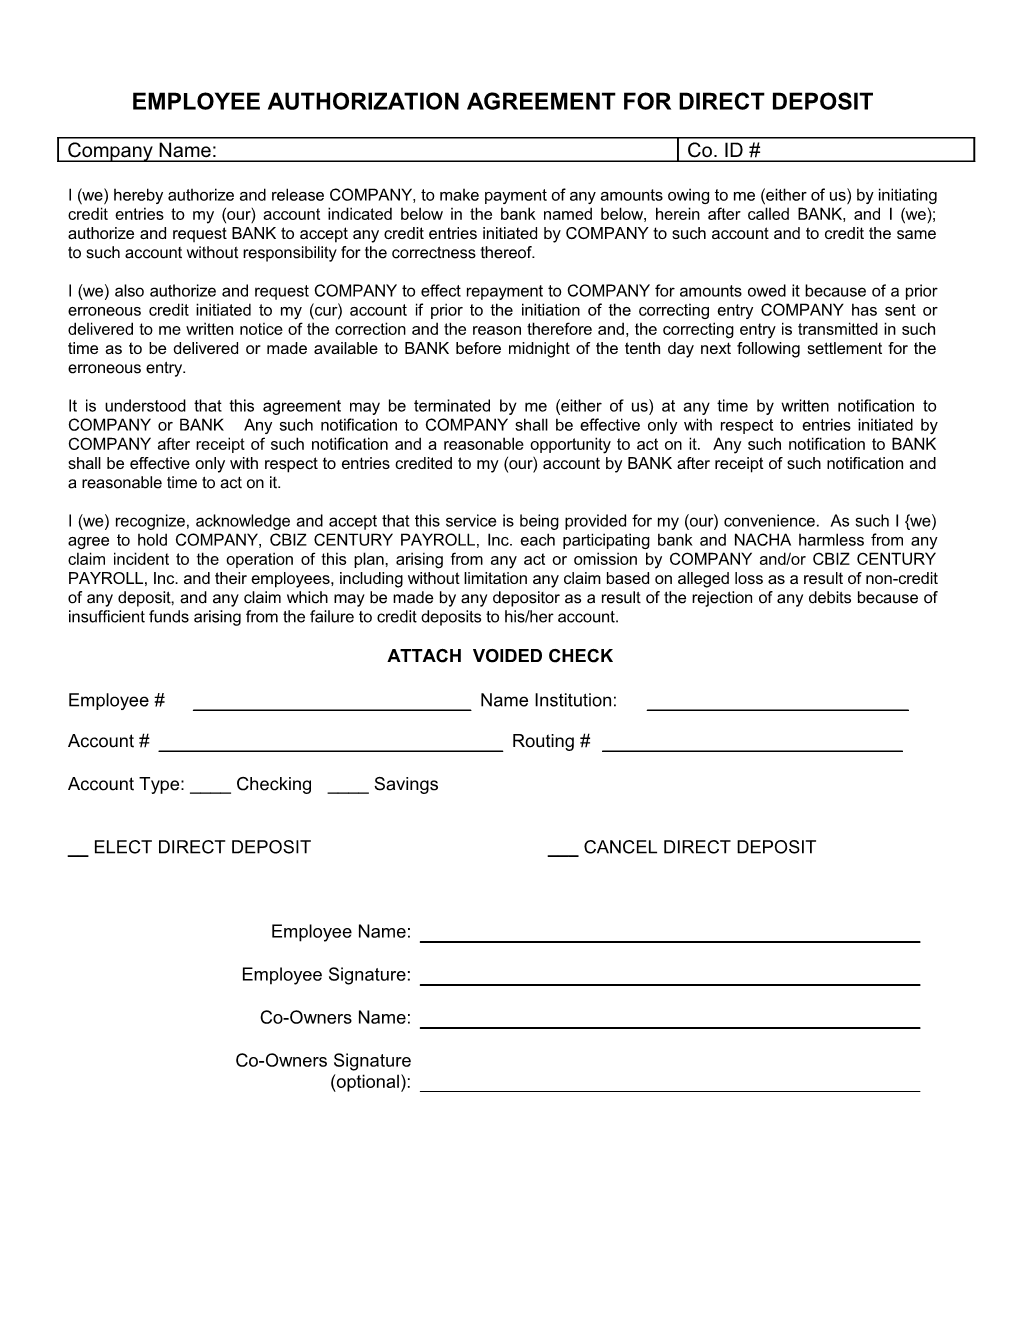 Employee Authorization Agreement for Direct Deposit